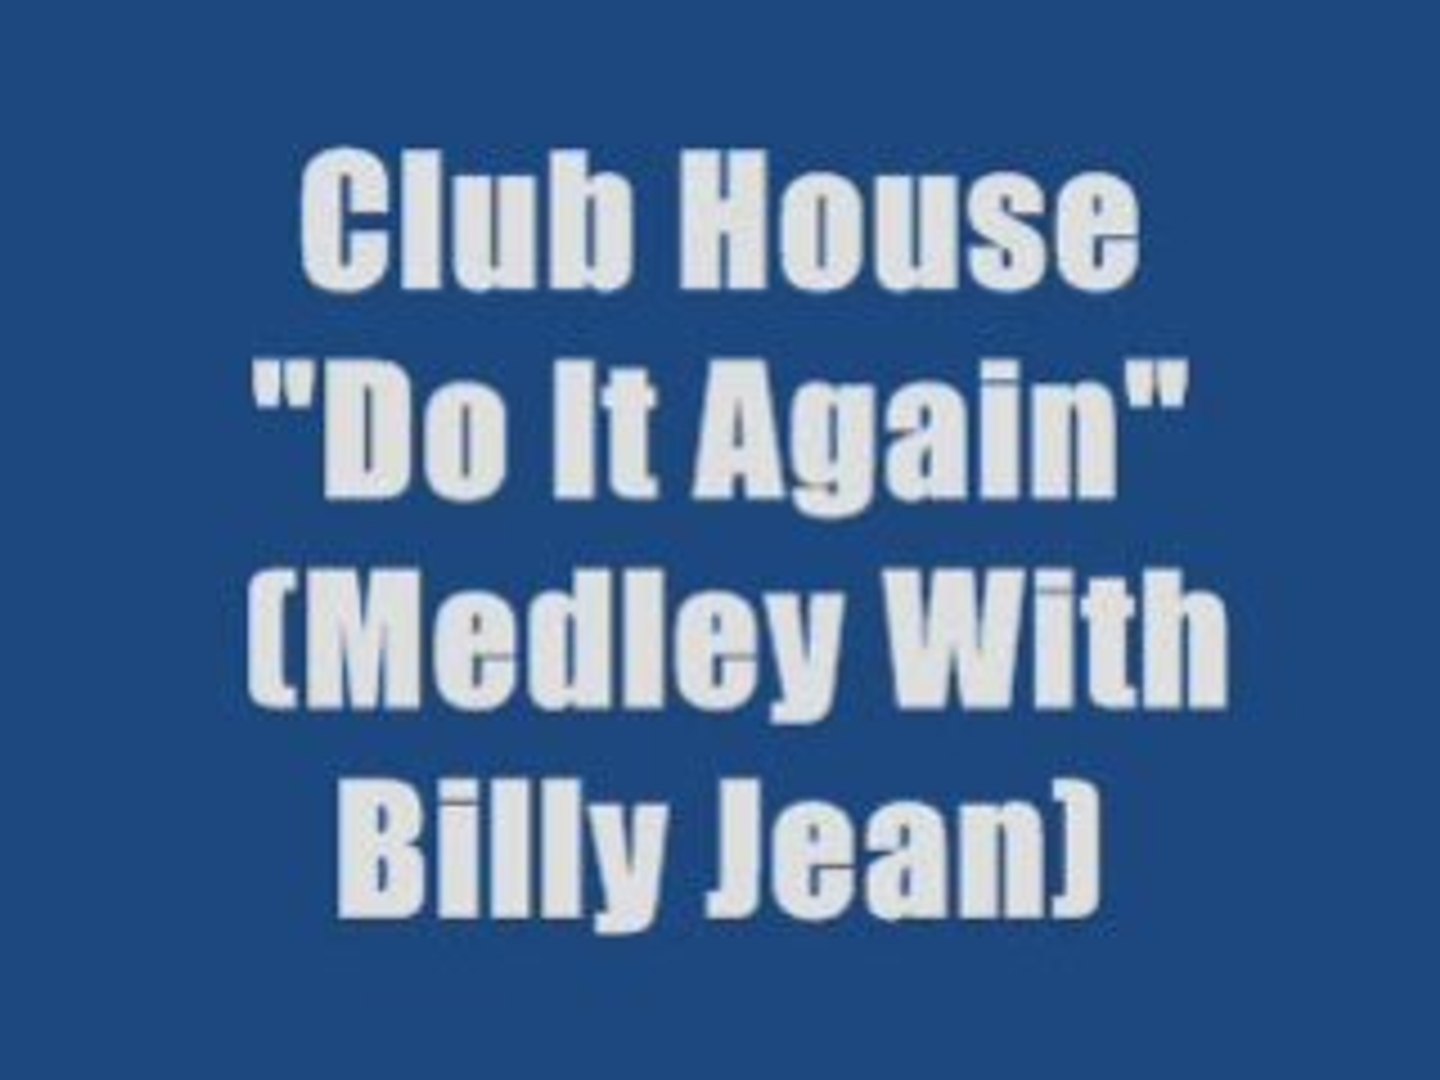 Club House - Do It Again (Medley With Billy Jean) - Vidéo Dailymotion